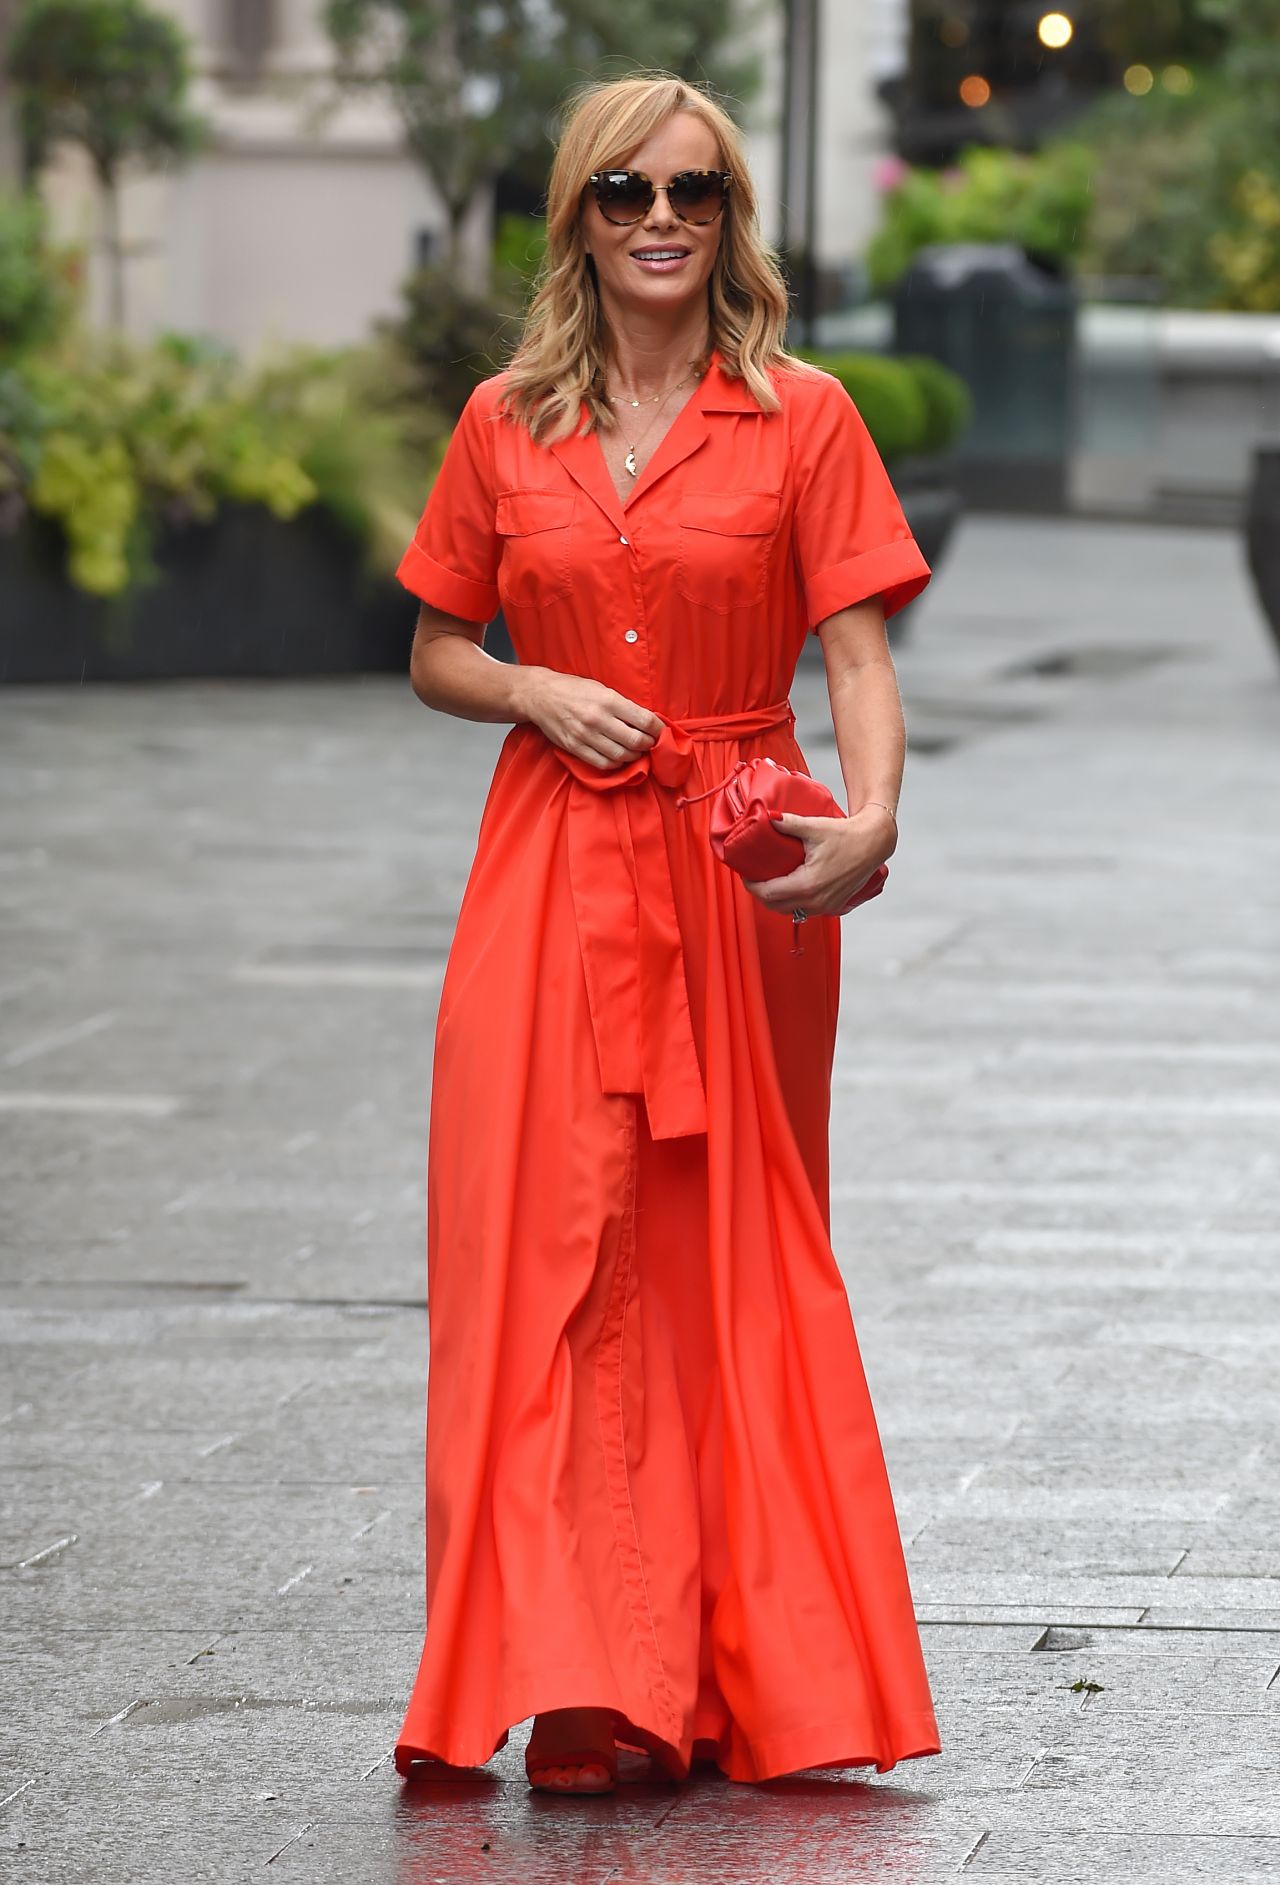 Amanda Holden in a Red Maxi Dress and Matching Heels- London 07/15/2020 ...